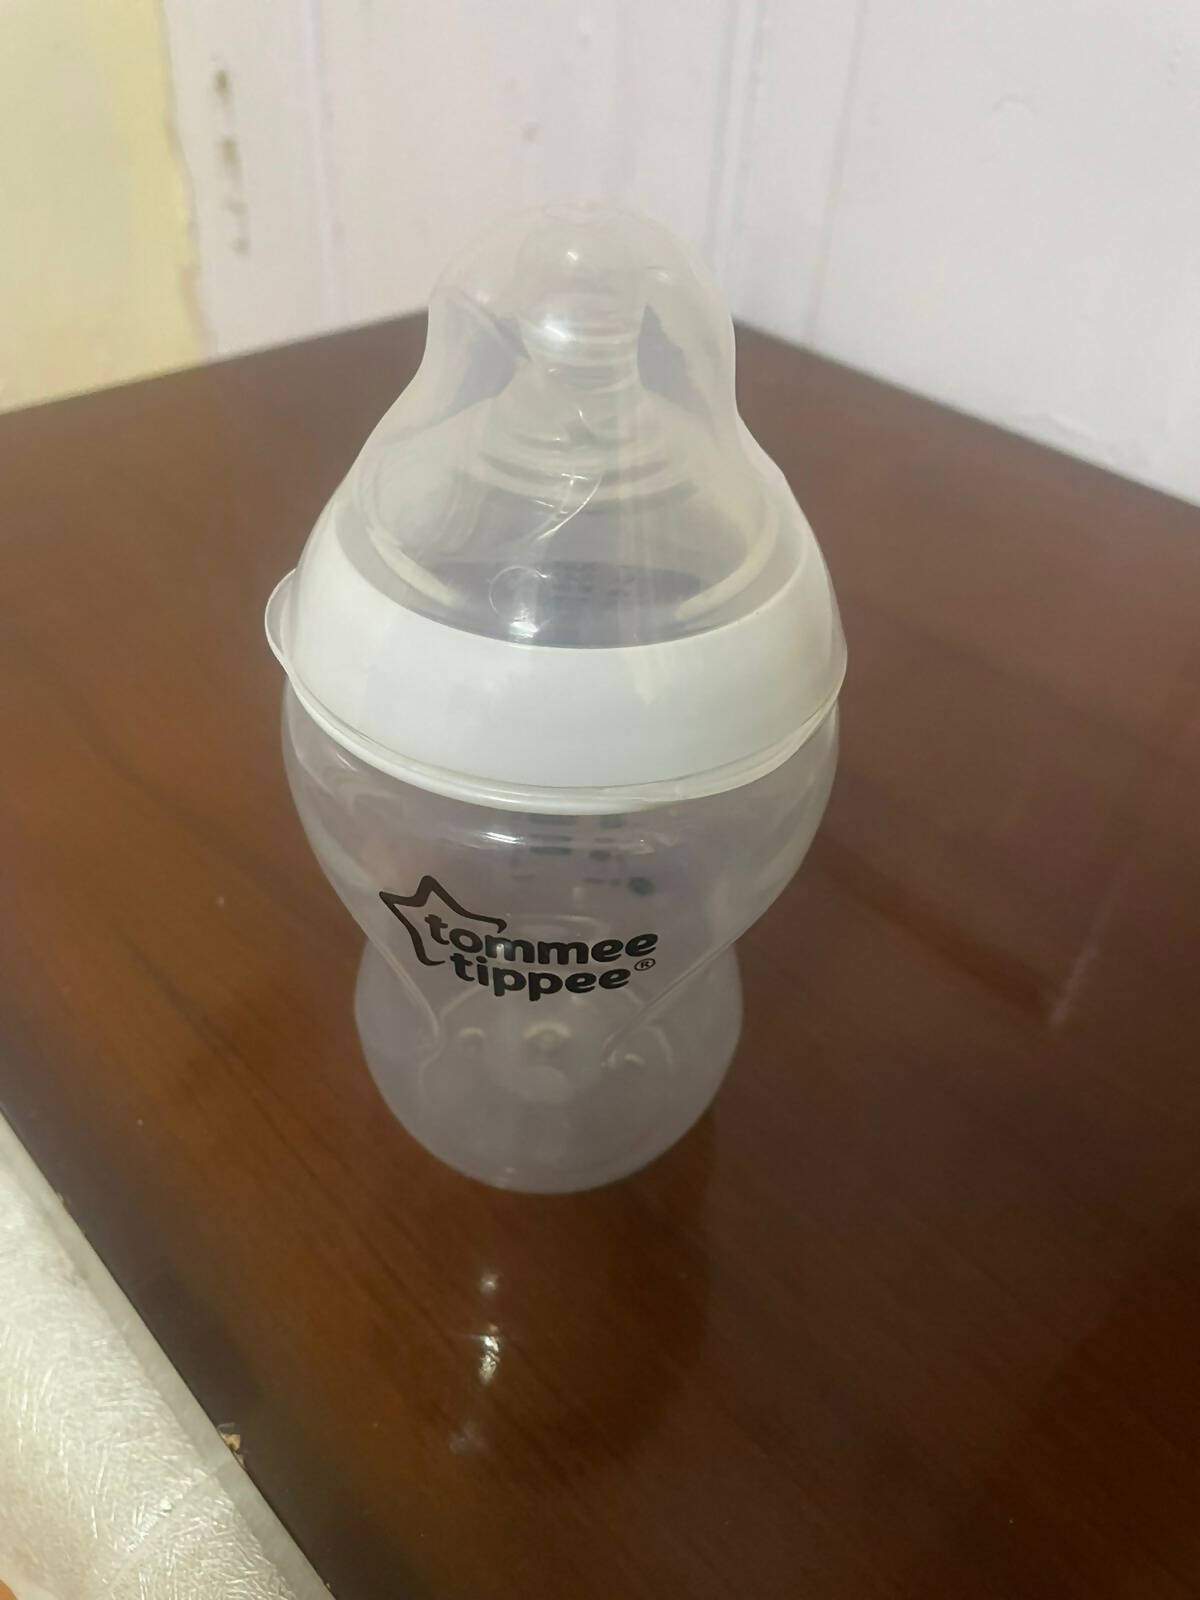 TOMMEE TIPPEE Closer to Nature Baby Bottle, Anti-Colic, Breast-like Nipple, BPA-Free - Slow Flow, 260 ml (Imported from USA) - PyaraBaby